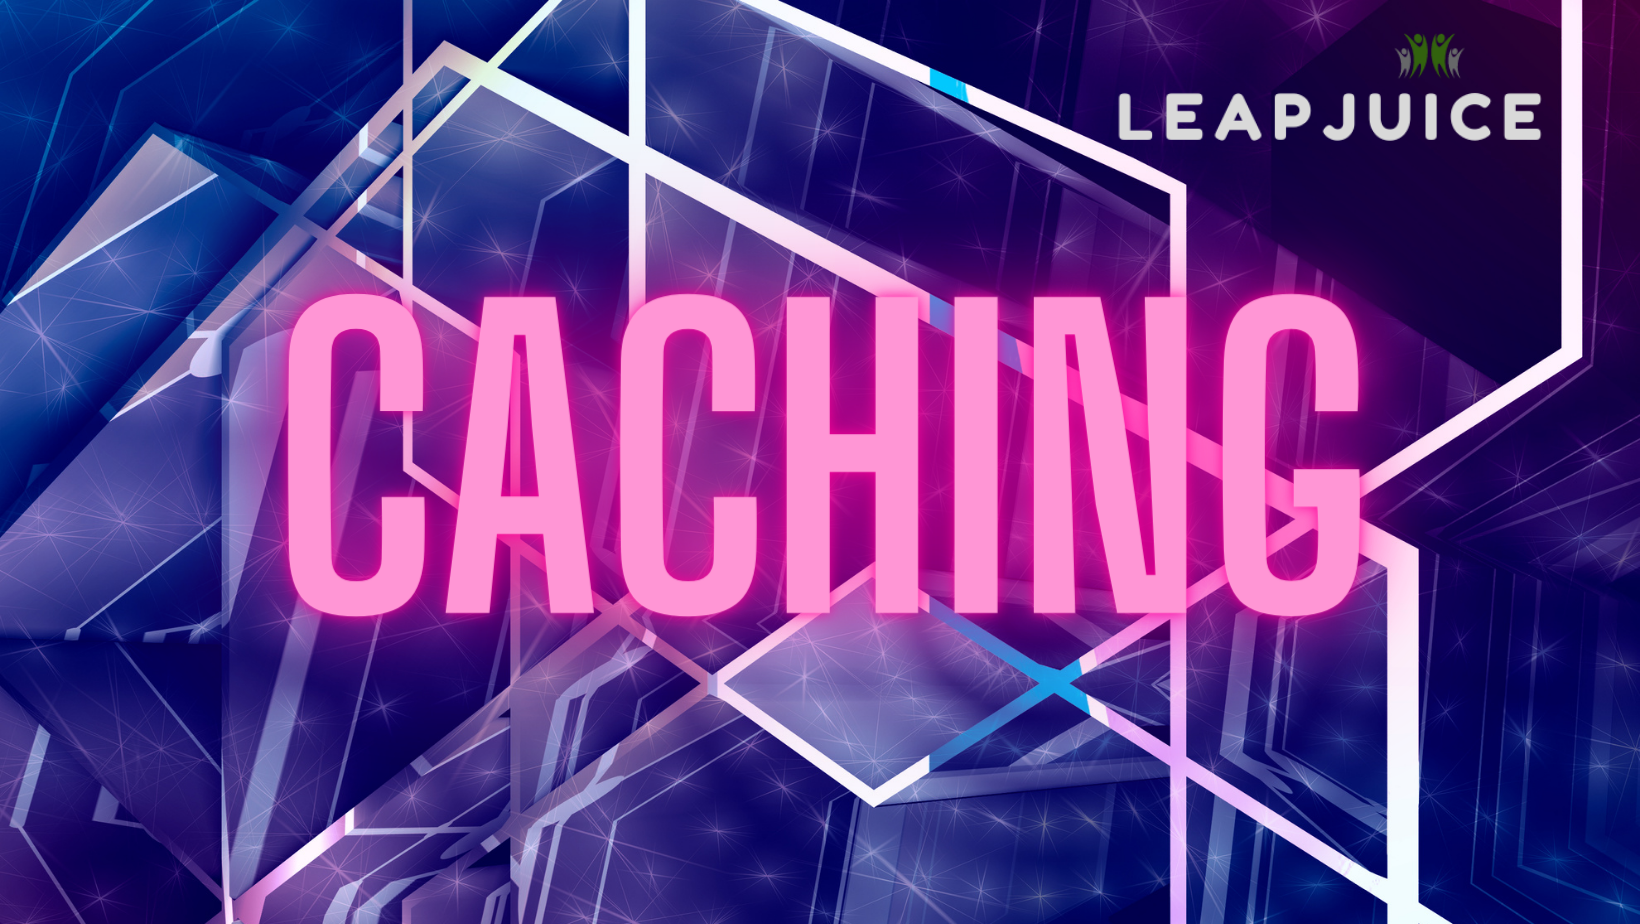 Caching in pink neon to represent Leapjuice caching technology